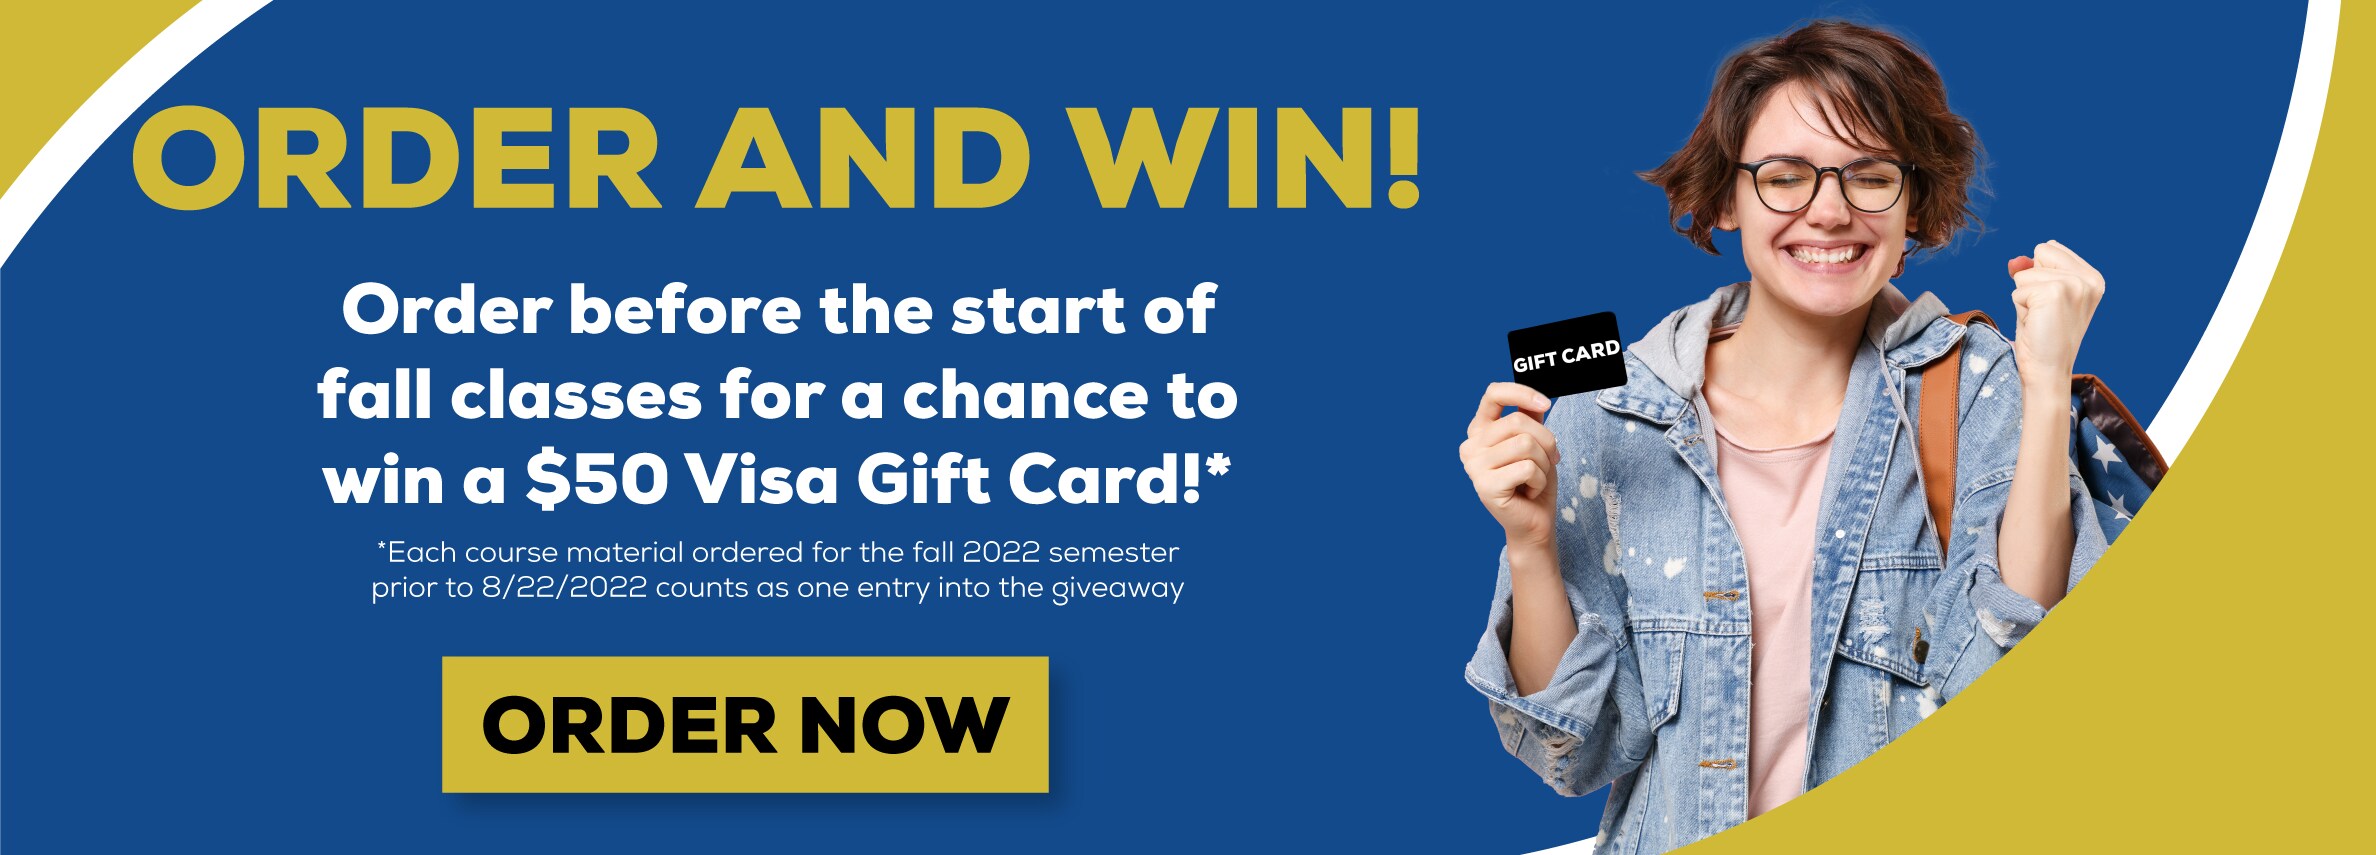 Order and win! order before the start of fall classes for a chance to win a $50 Visa Gift Card. each course material ordered for the fall 2022 semester prior to 8/22/2022 count as one entry to the giveaway. Order Now